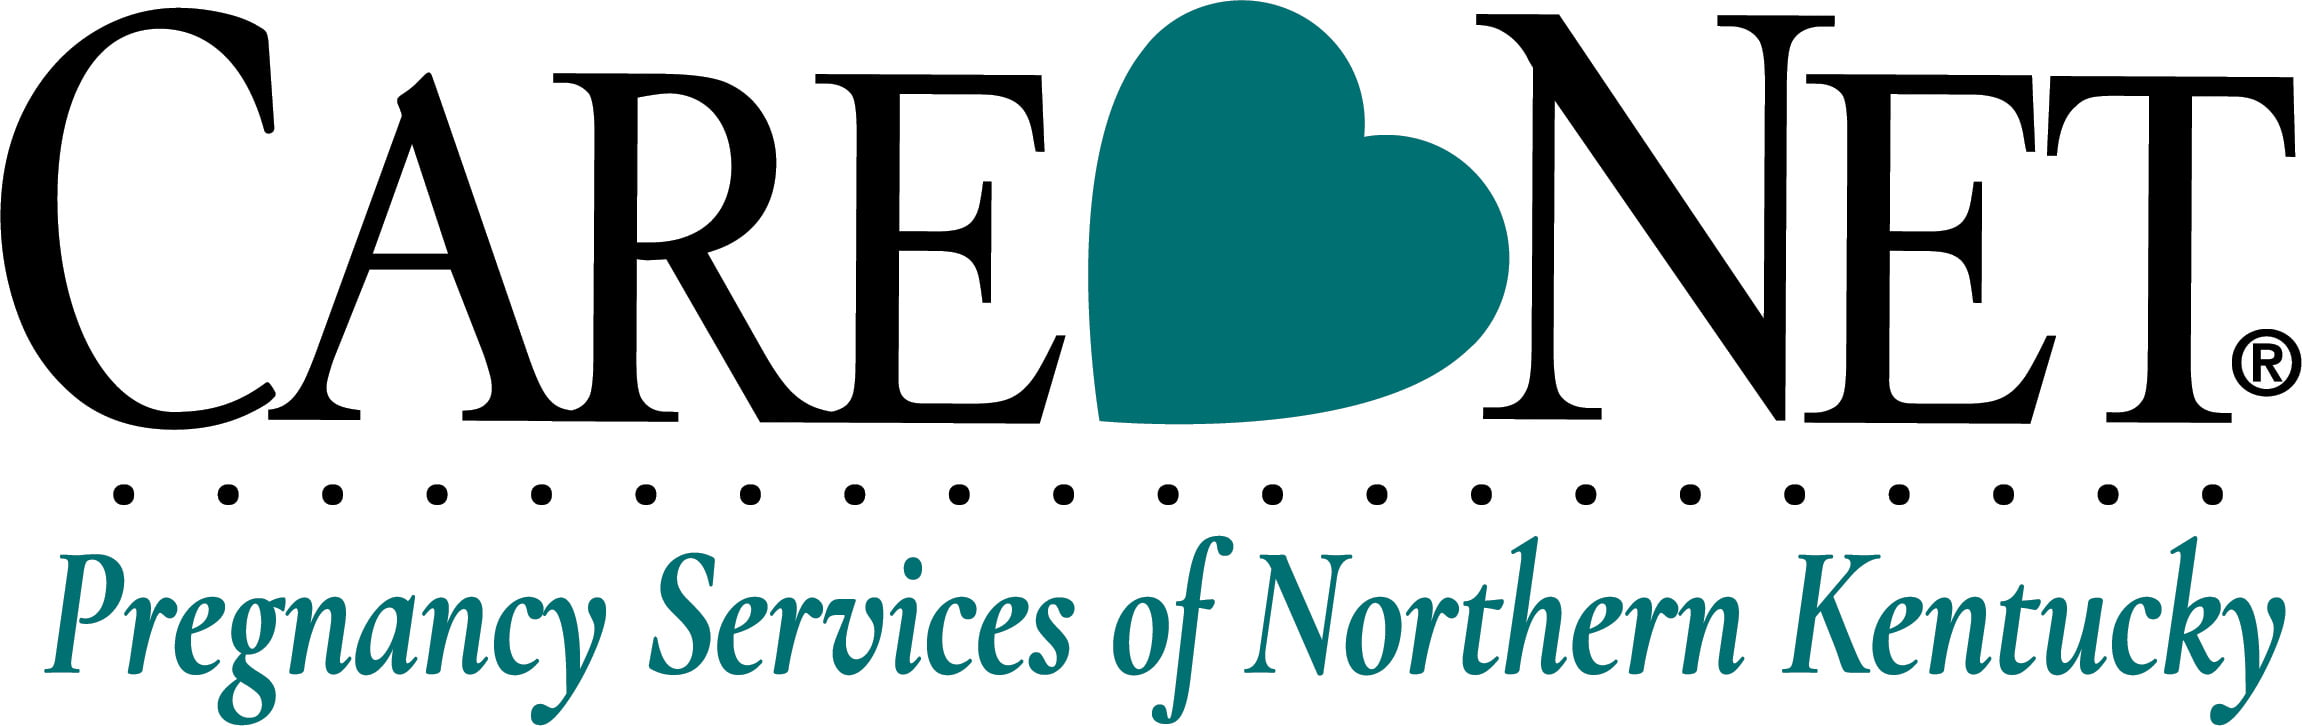 Your Source for Abortion Information in Kentucky | Care Net Pregnancy Services of Northern Kentucky